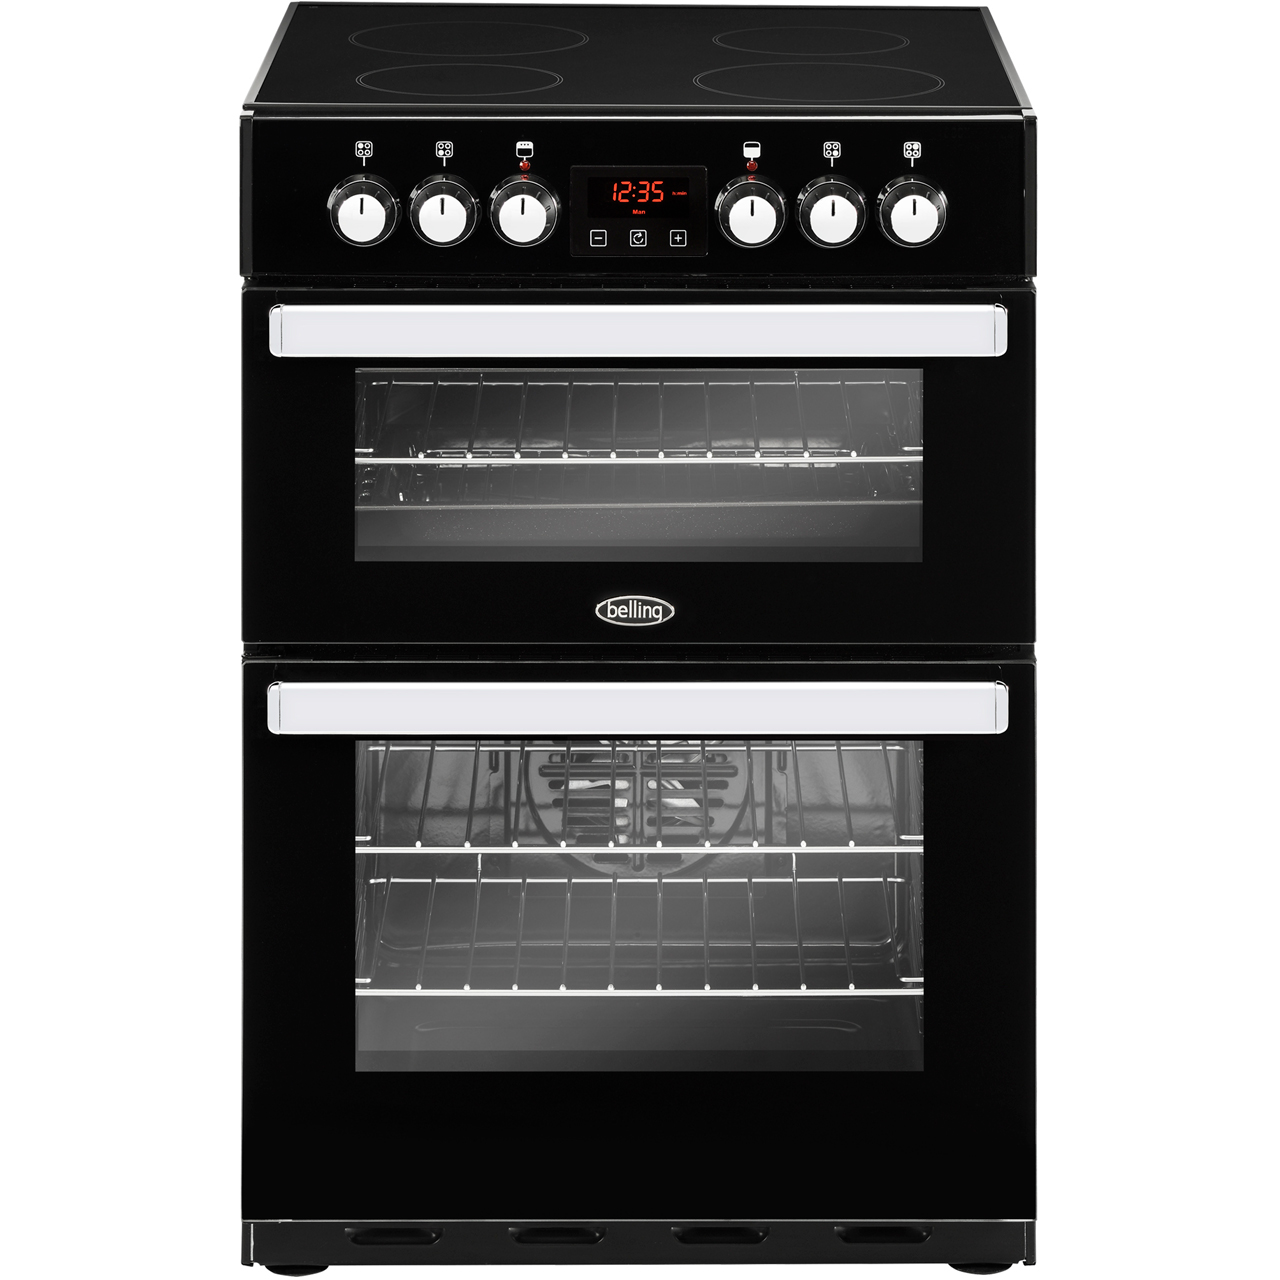 Belling Cookcentre 60E Electric Cooker with Ceramic Hob Review